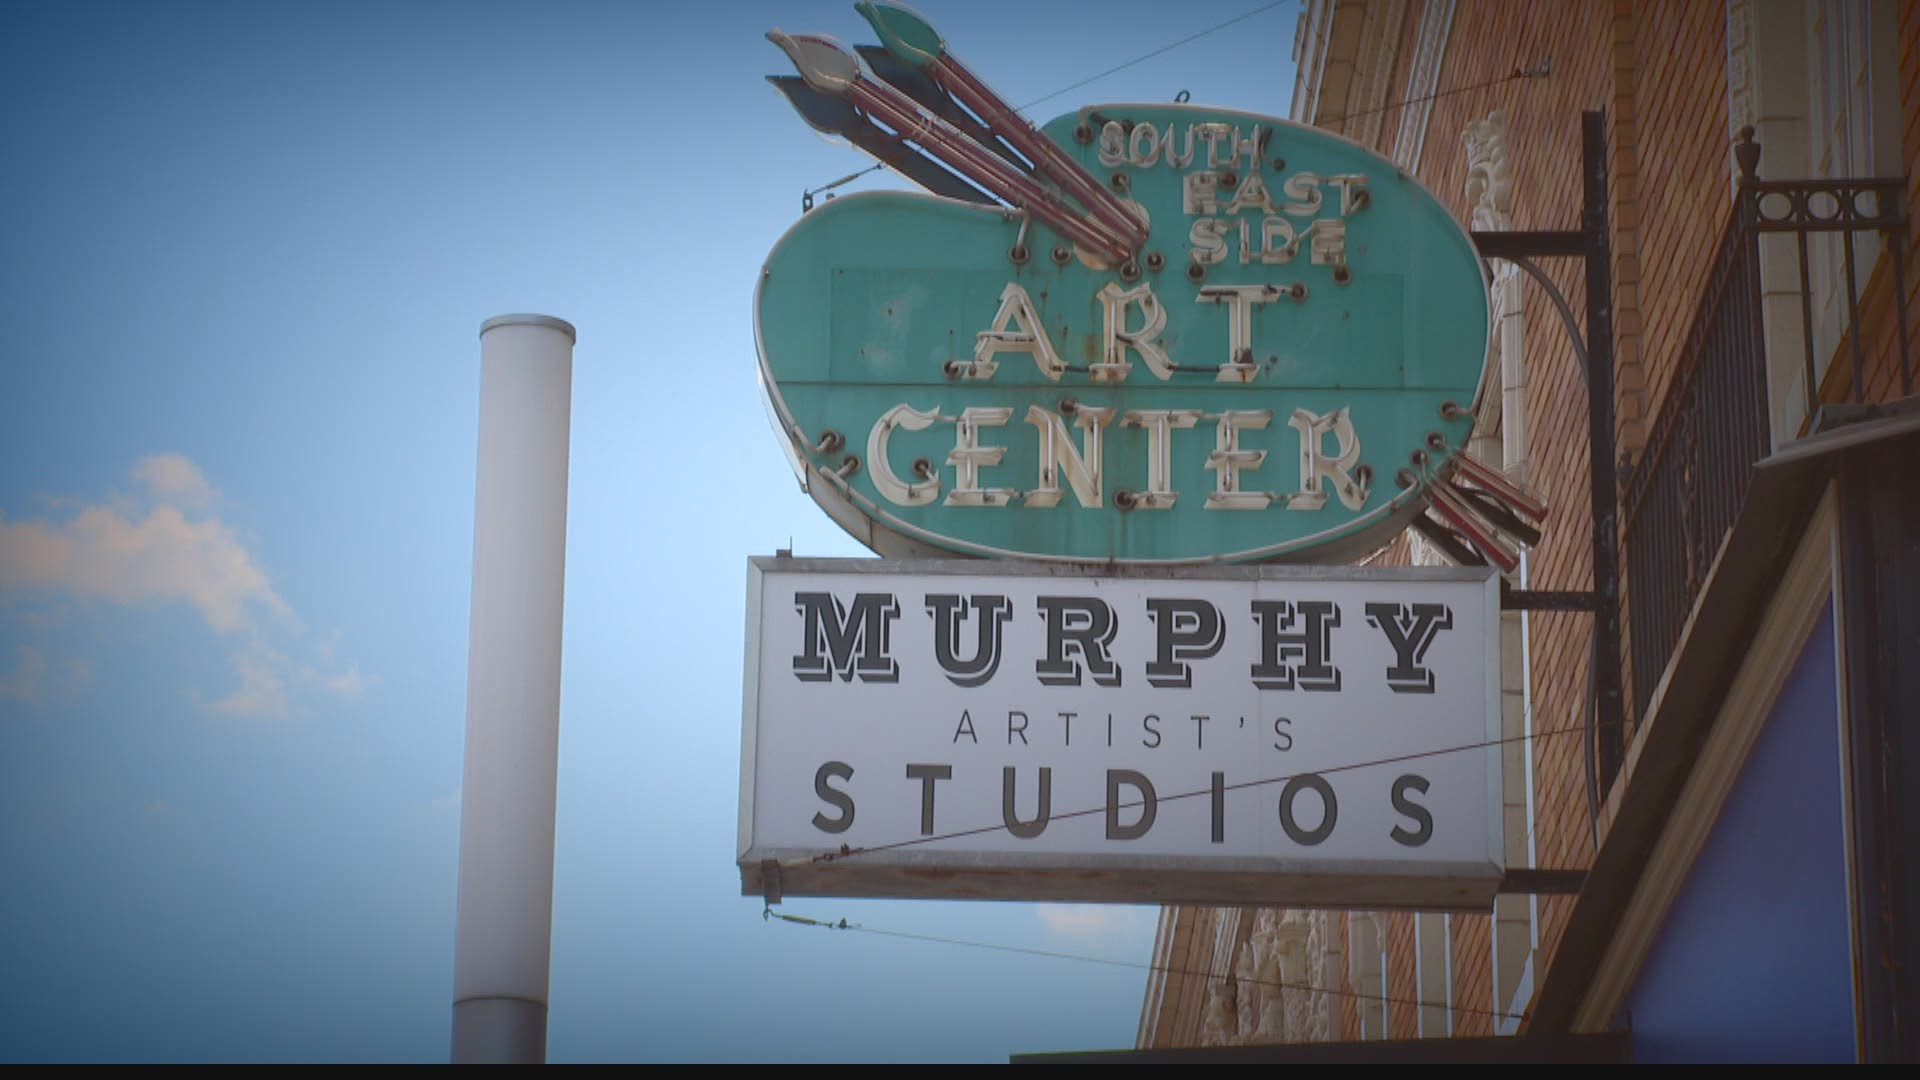 The event at the Murphy Arts Center in Fountain Square is back with expanded its galleries and exhibits.